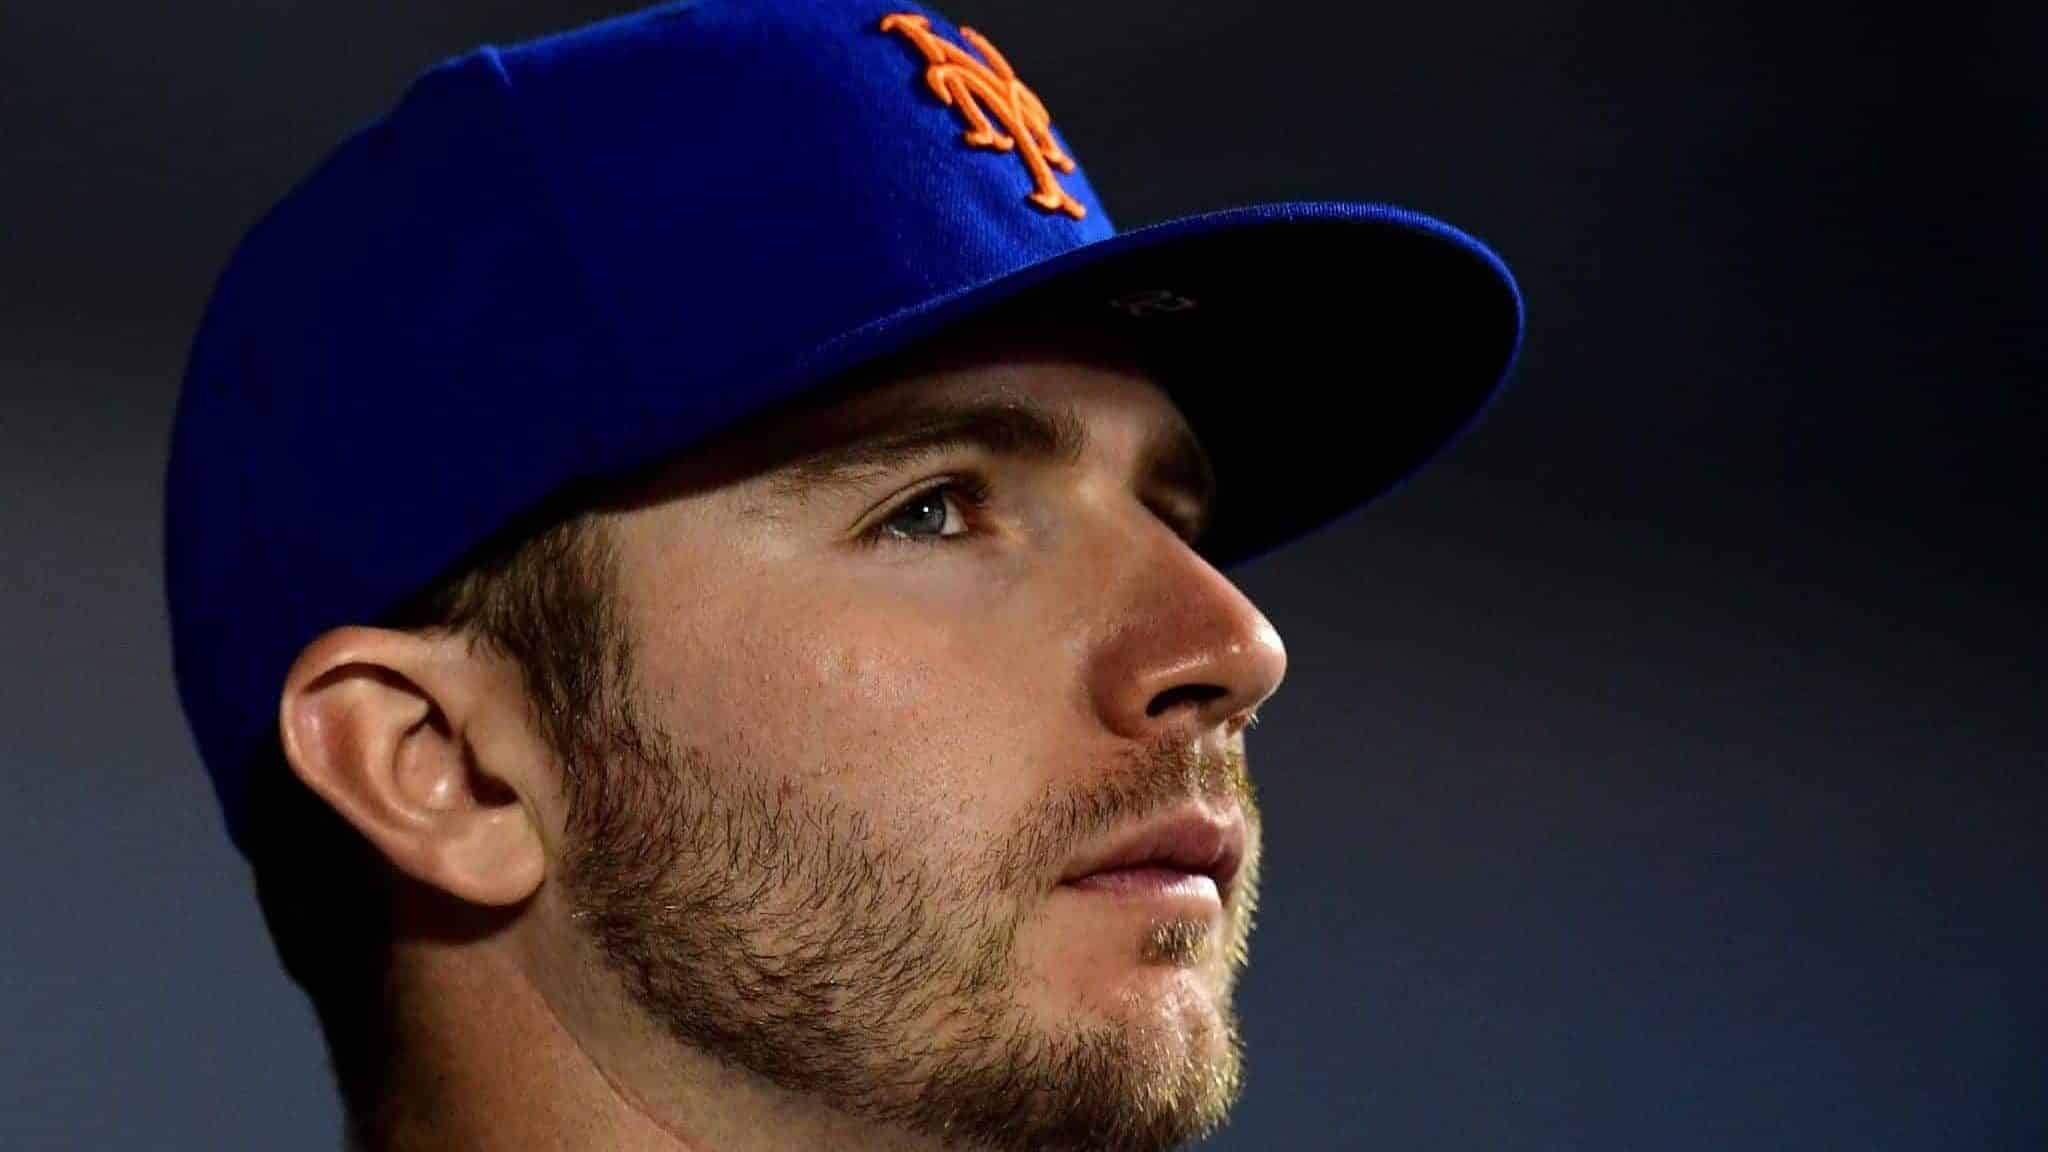 NEW YORK, NEW YORK - SEPTEMBER 25: Pete Alonso #20 of the New York Mets looks on during their game against the Miami Marlins at Citi Field on September 25, 2019 in the Flushing neighborhood of the Queens borough in New York City.